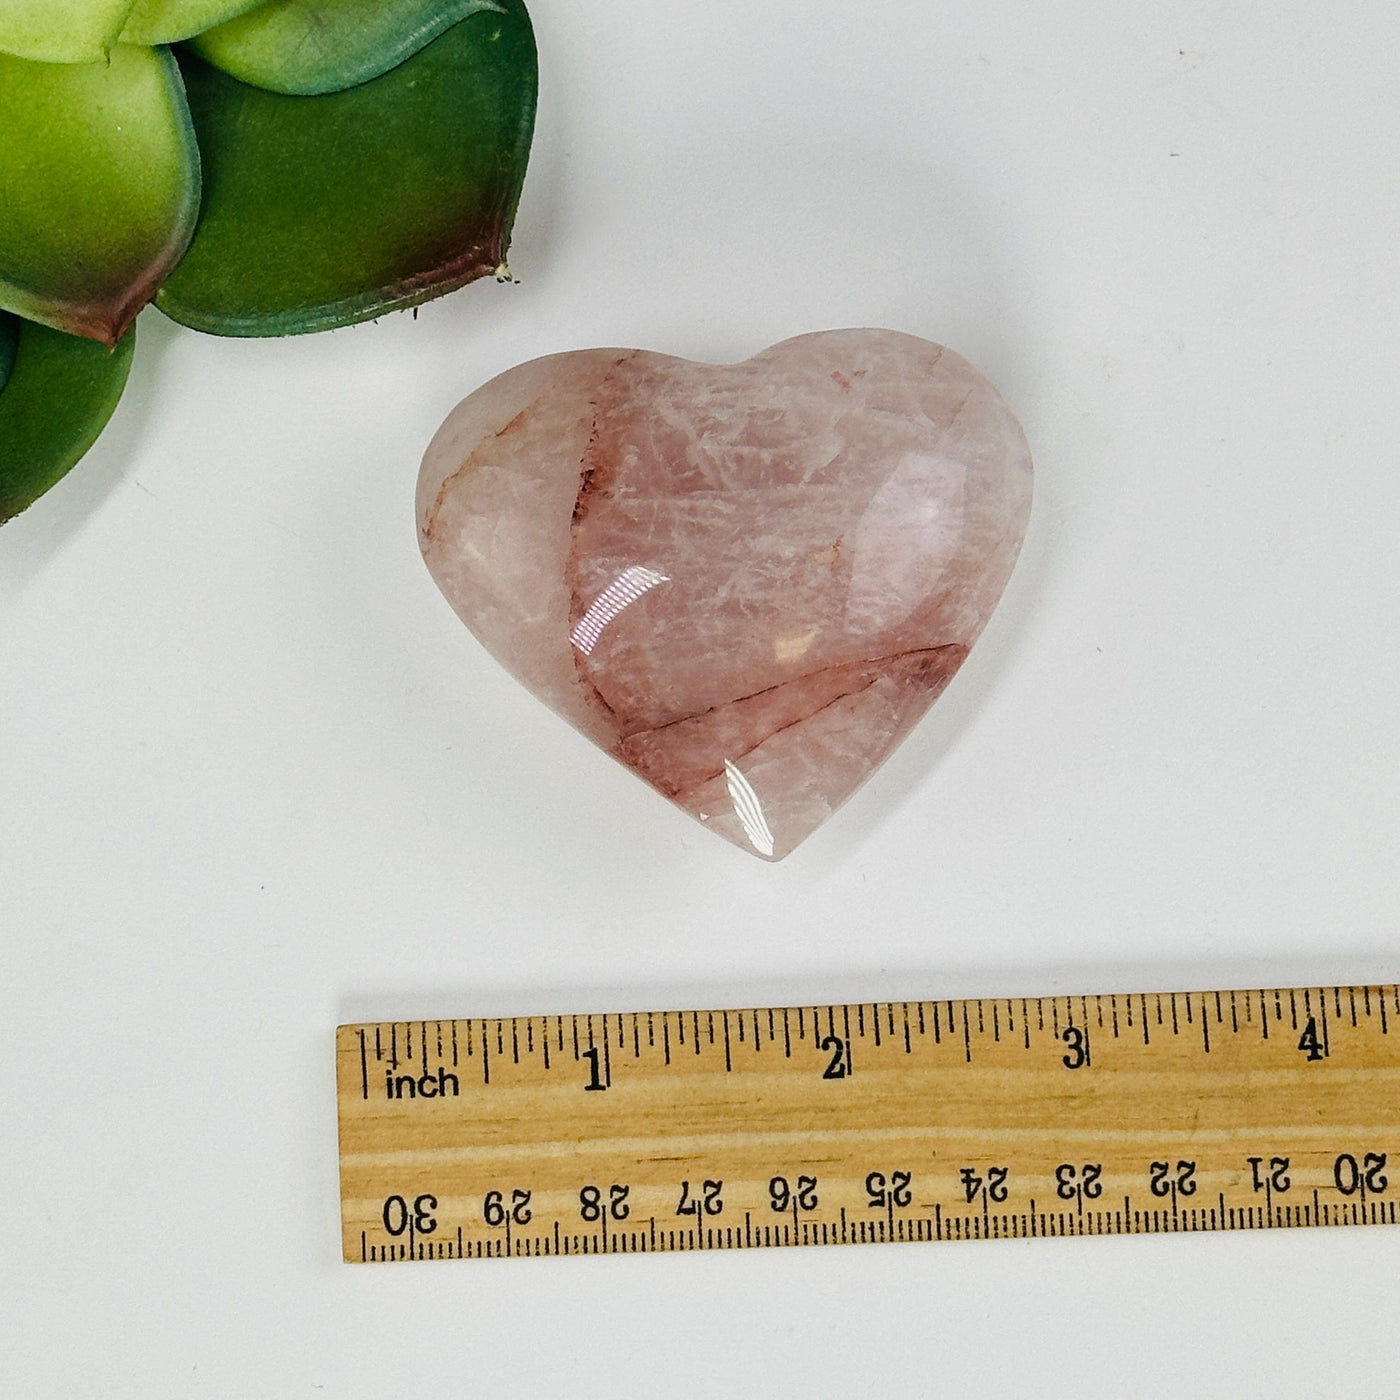 hematoid quartz heart next to a ruler for size reference